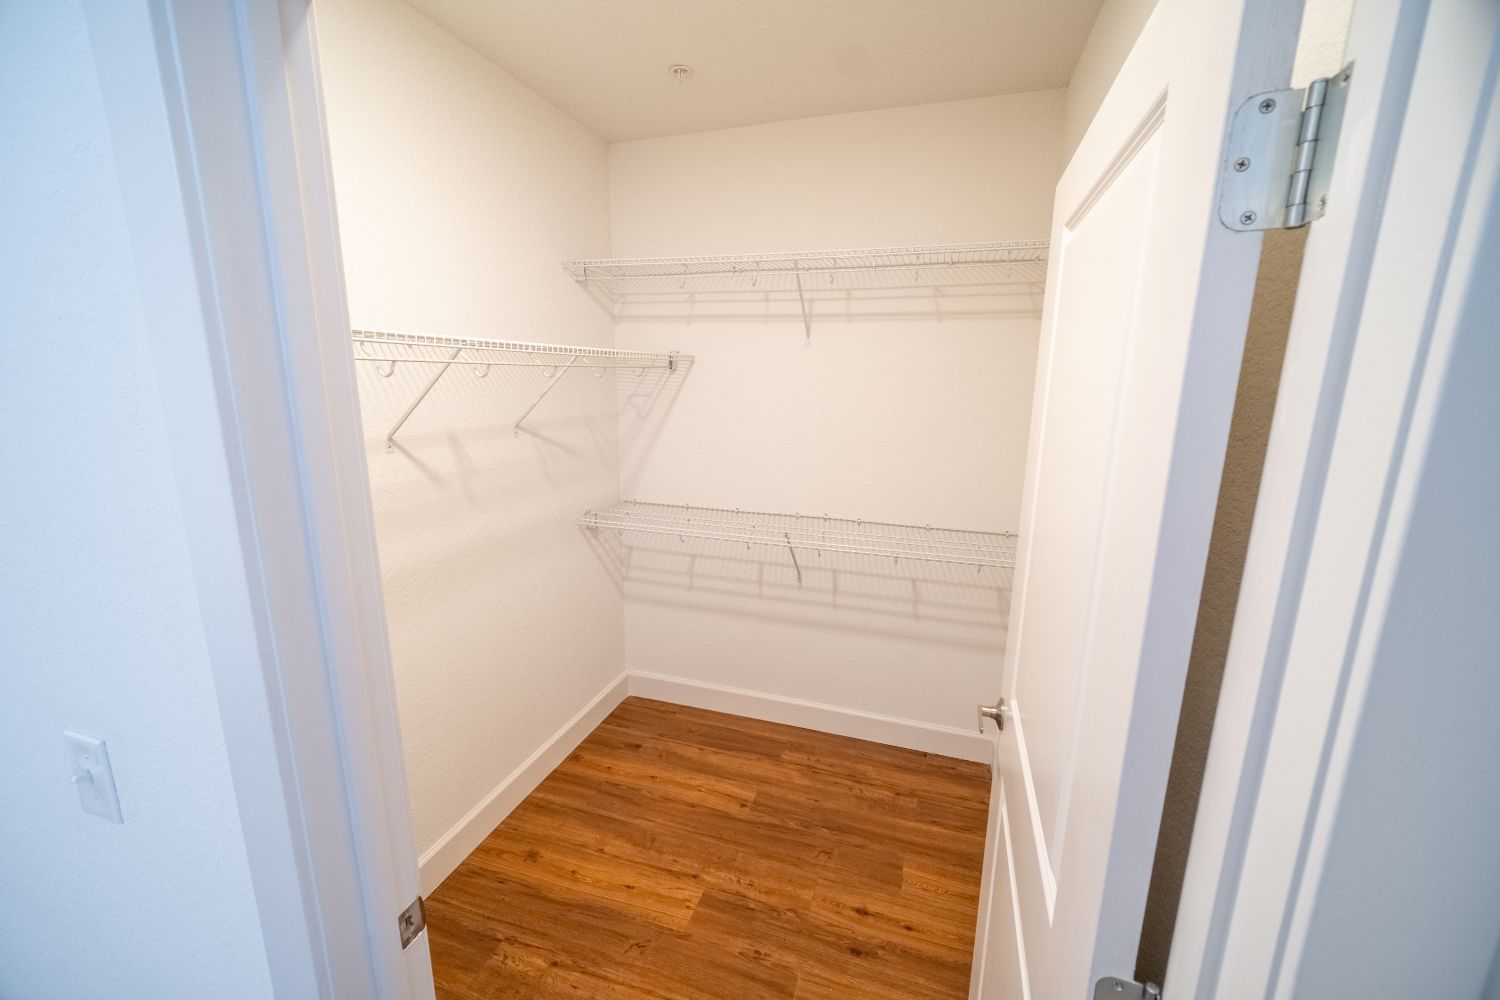 Large walk-in closets and wood-look flooring throughout the apartment